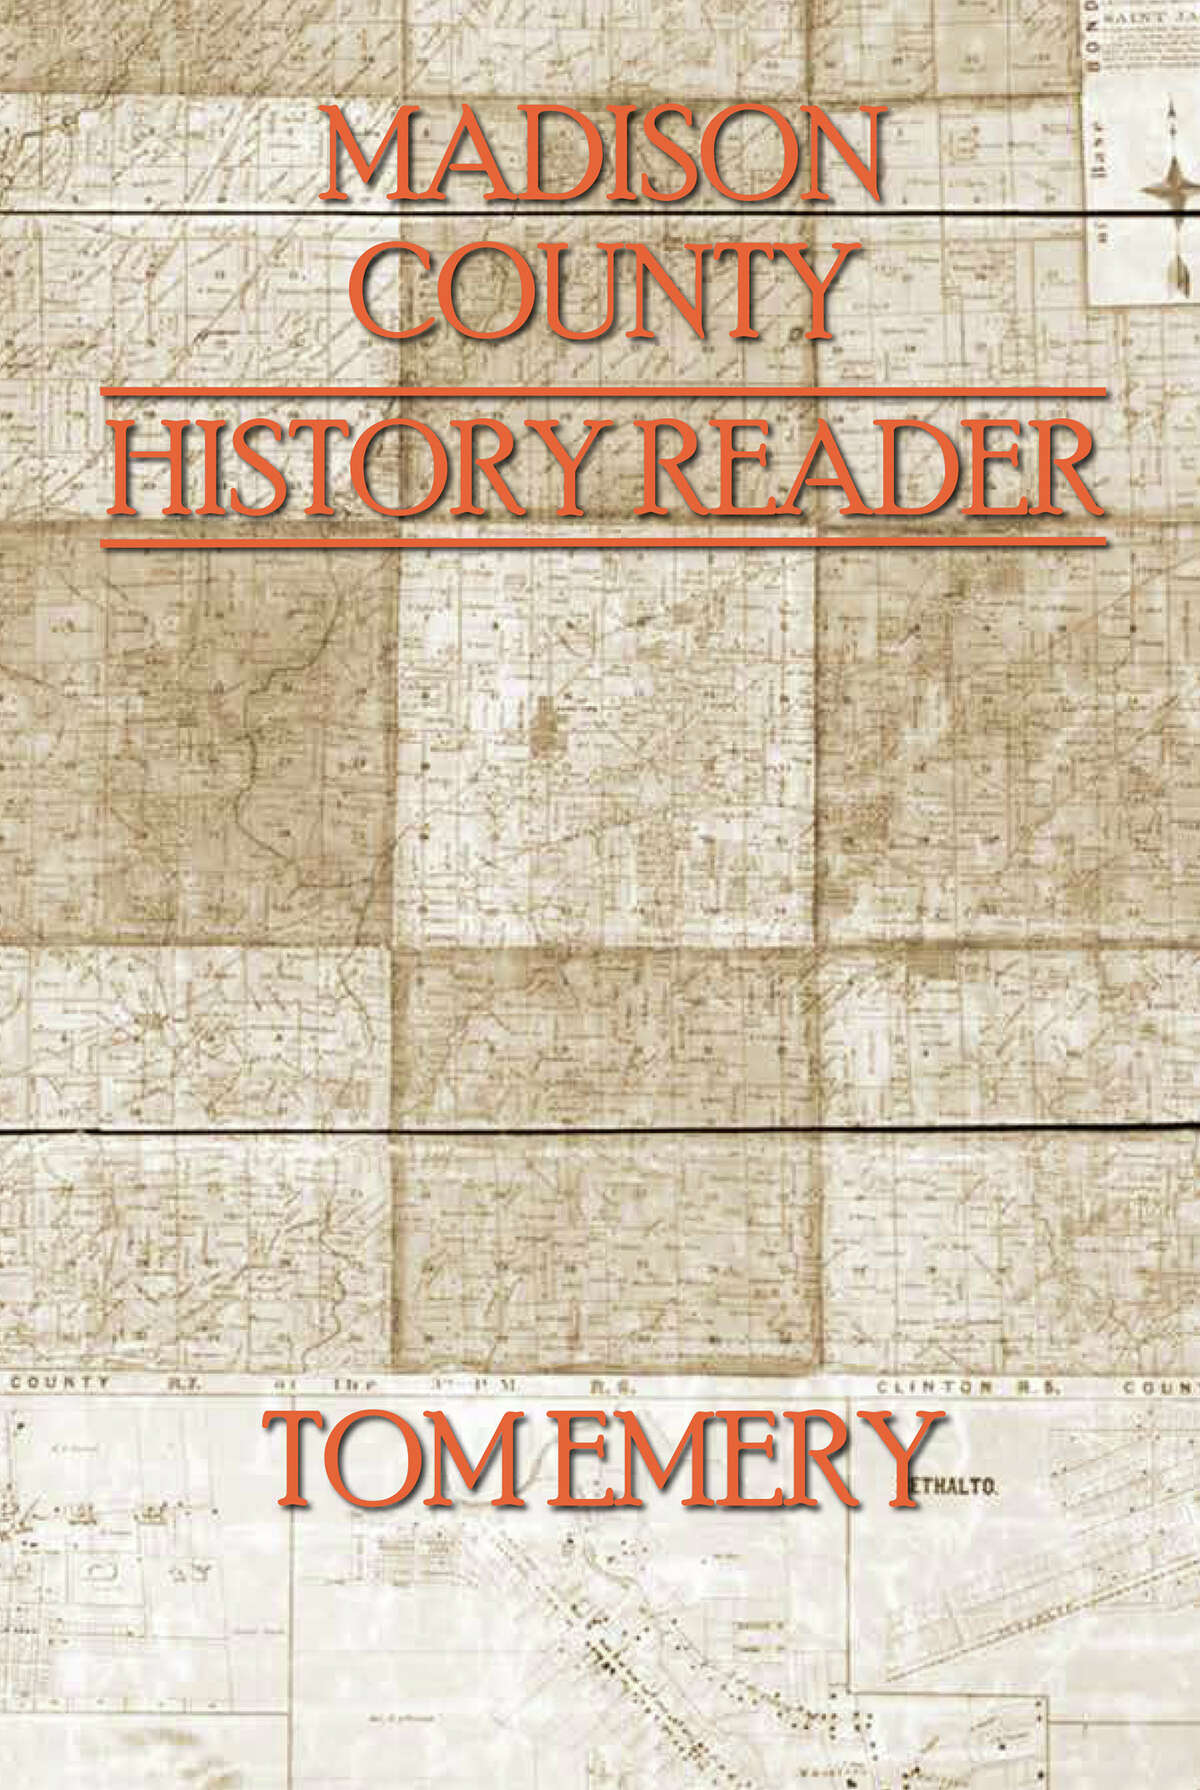 "The Madison County History Reader"